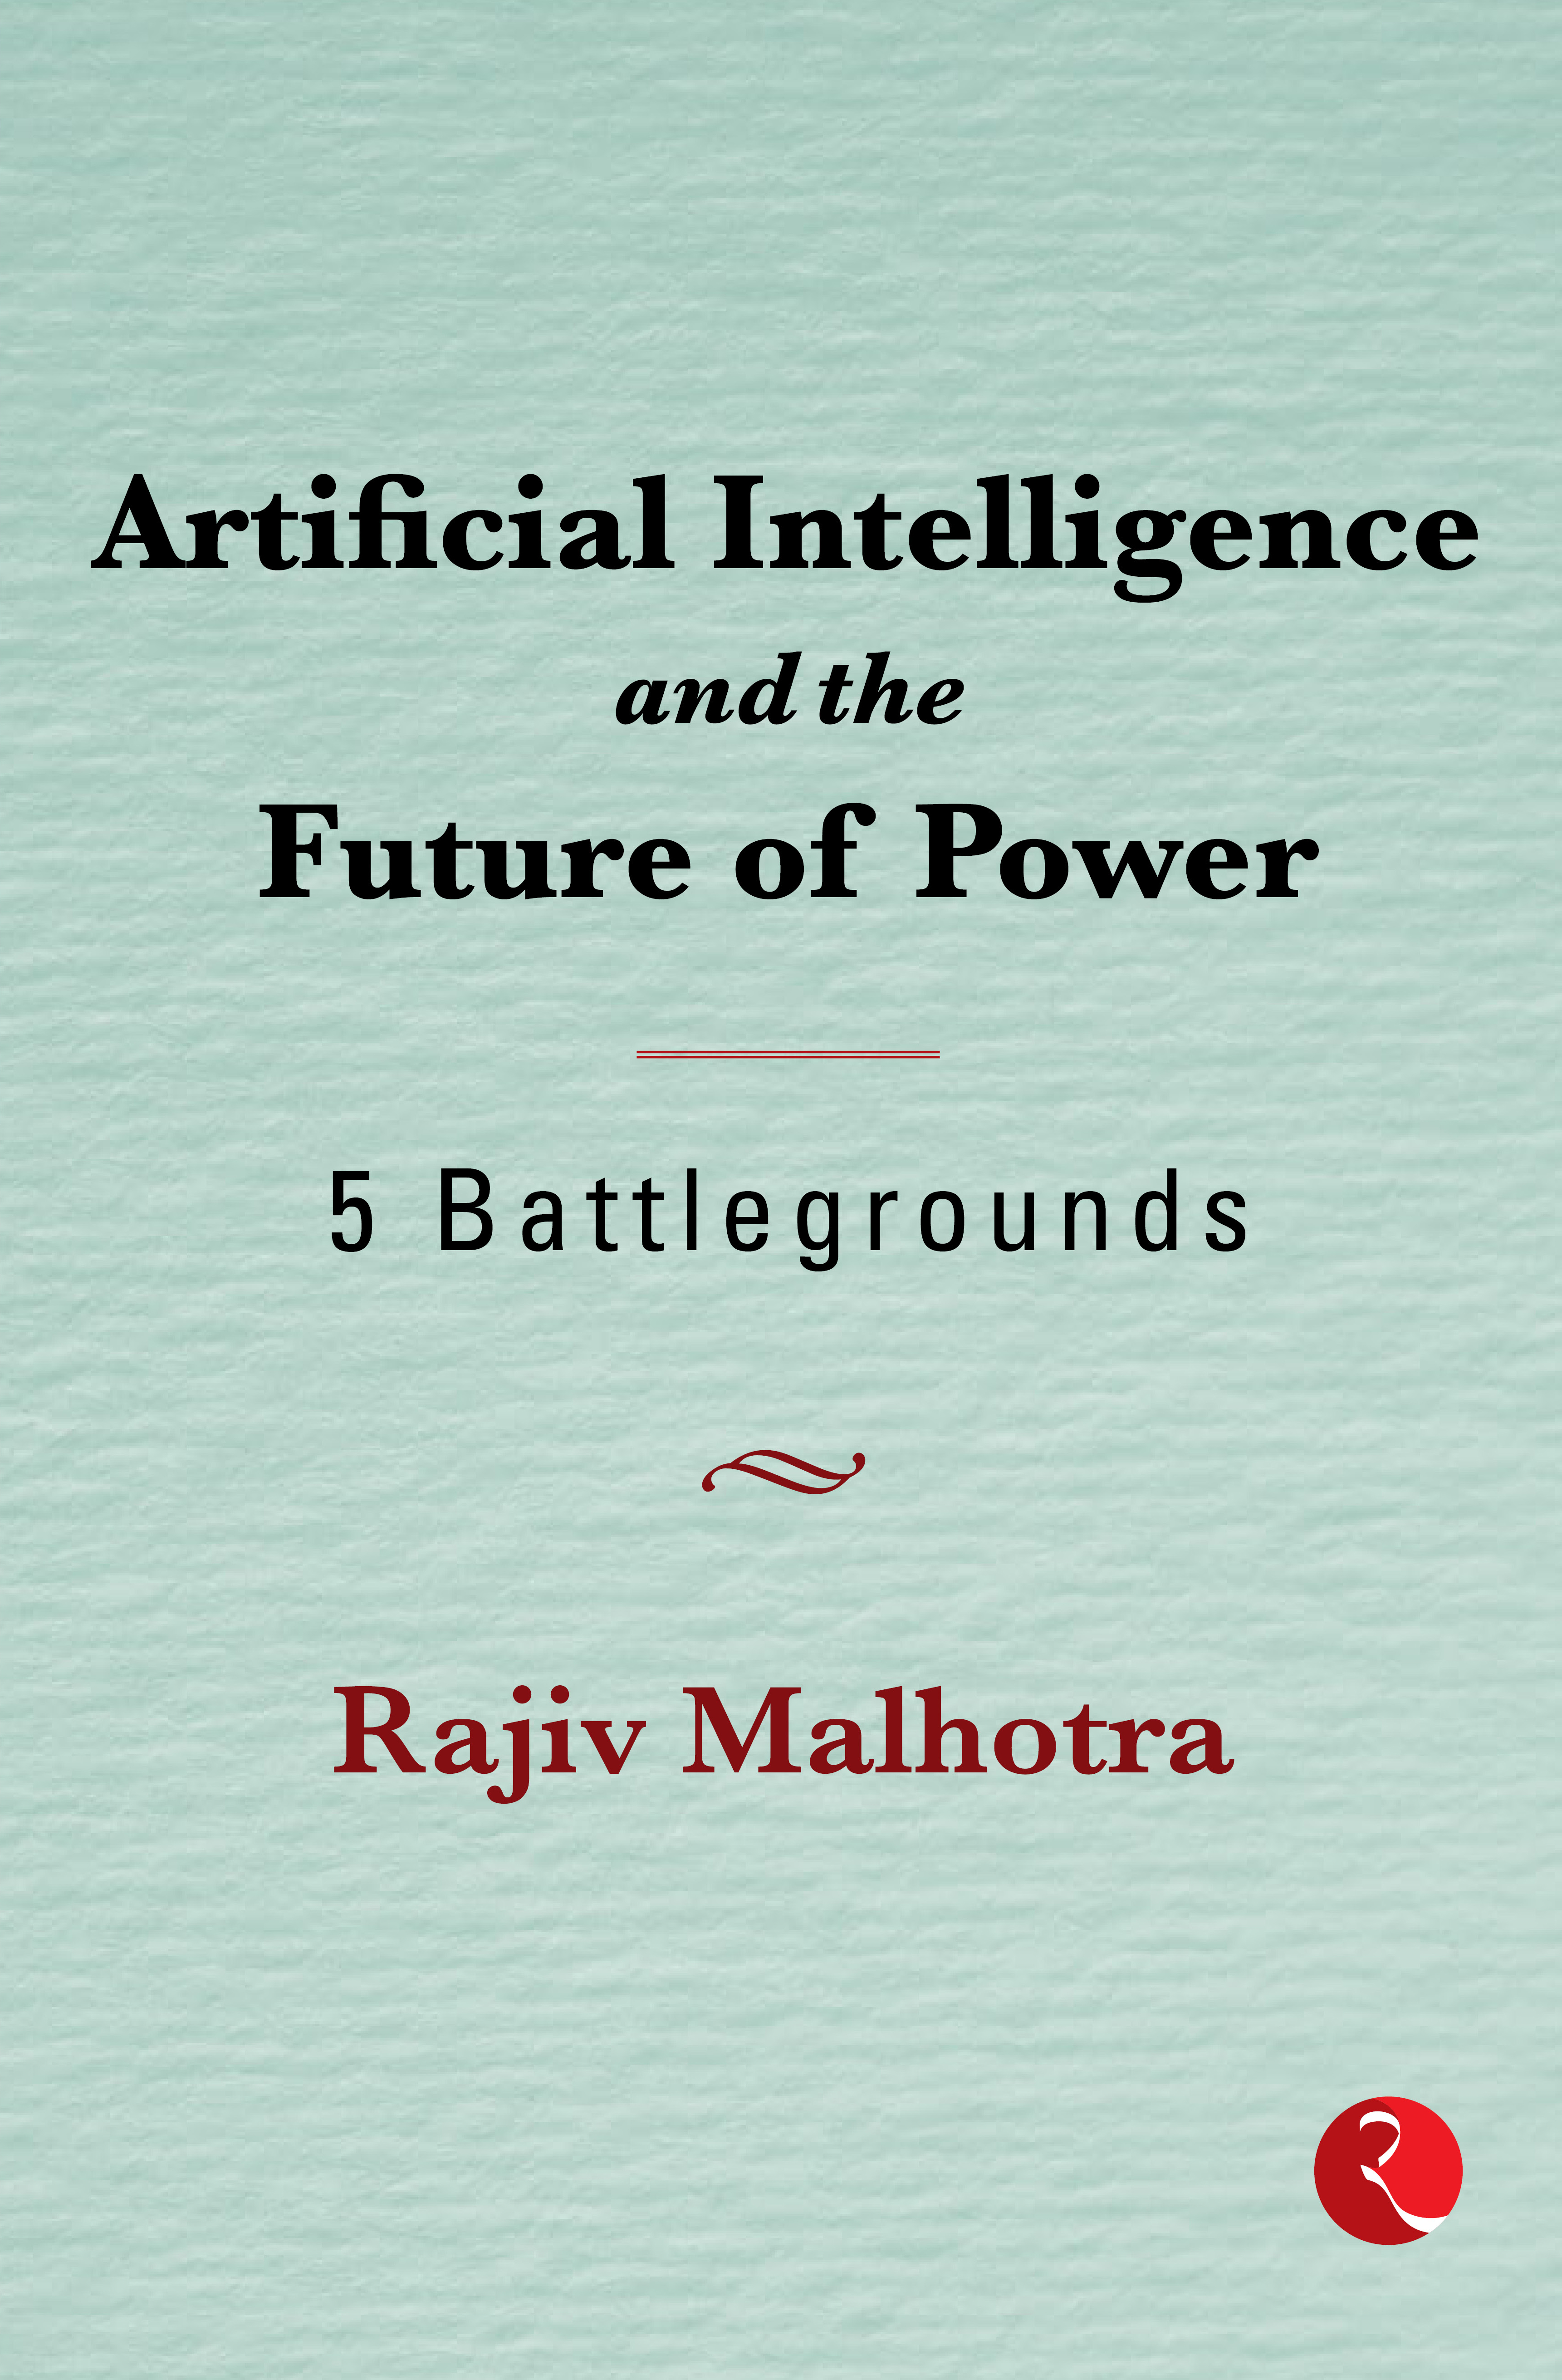 Artificial Intelligence and the Future of Power